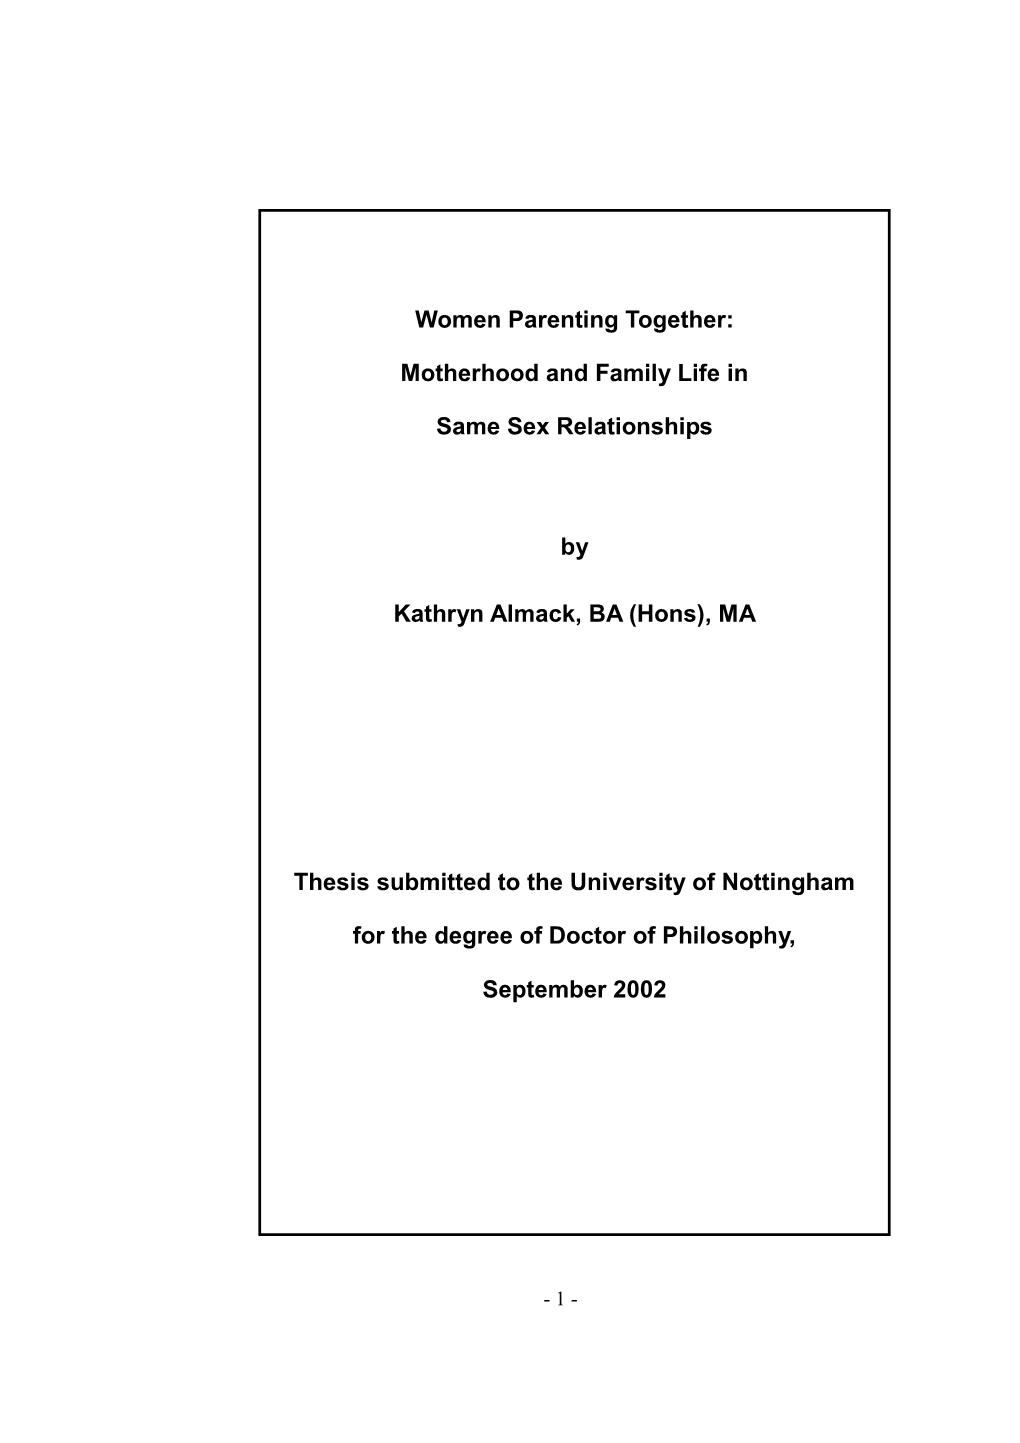 Motherhood and Family Life in Same Sex Relationships. Phd Thesis